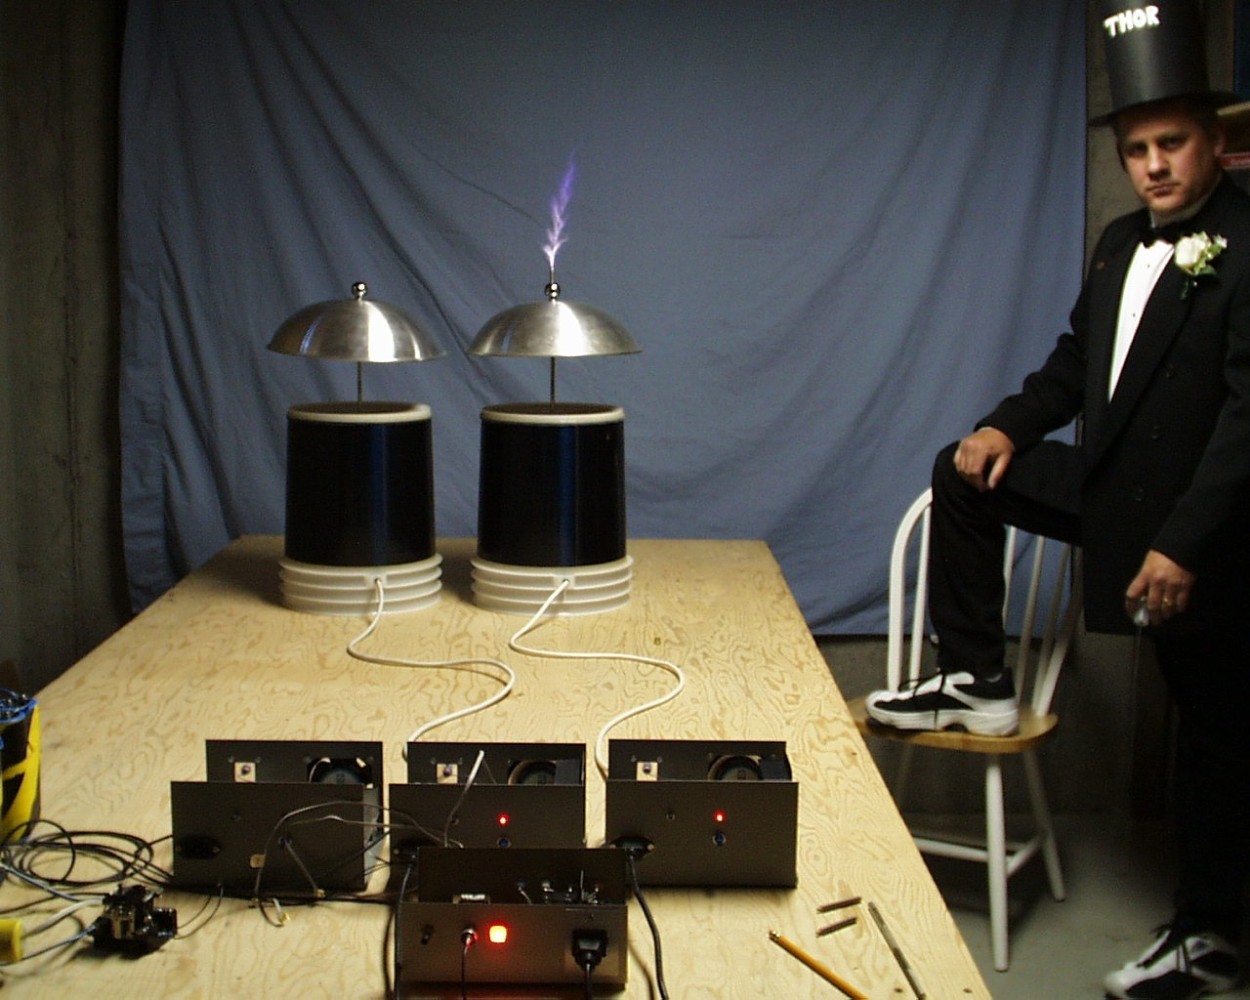 2000 Duane Bylund and 3-phase Tesla coil system with 2 resonators